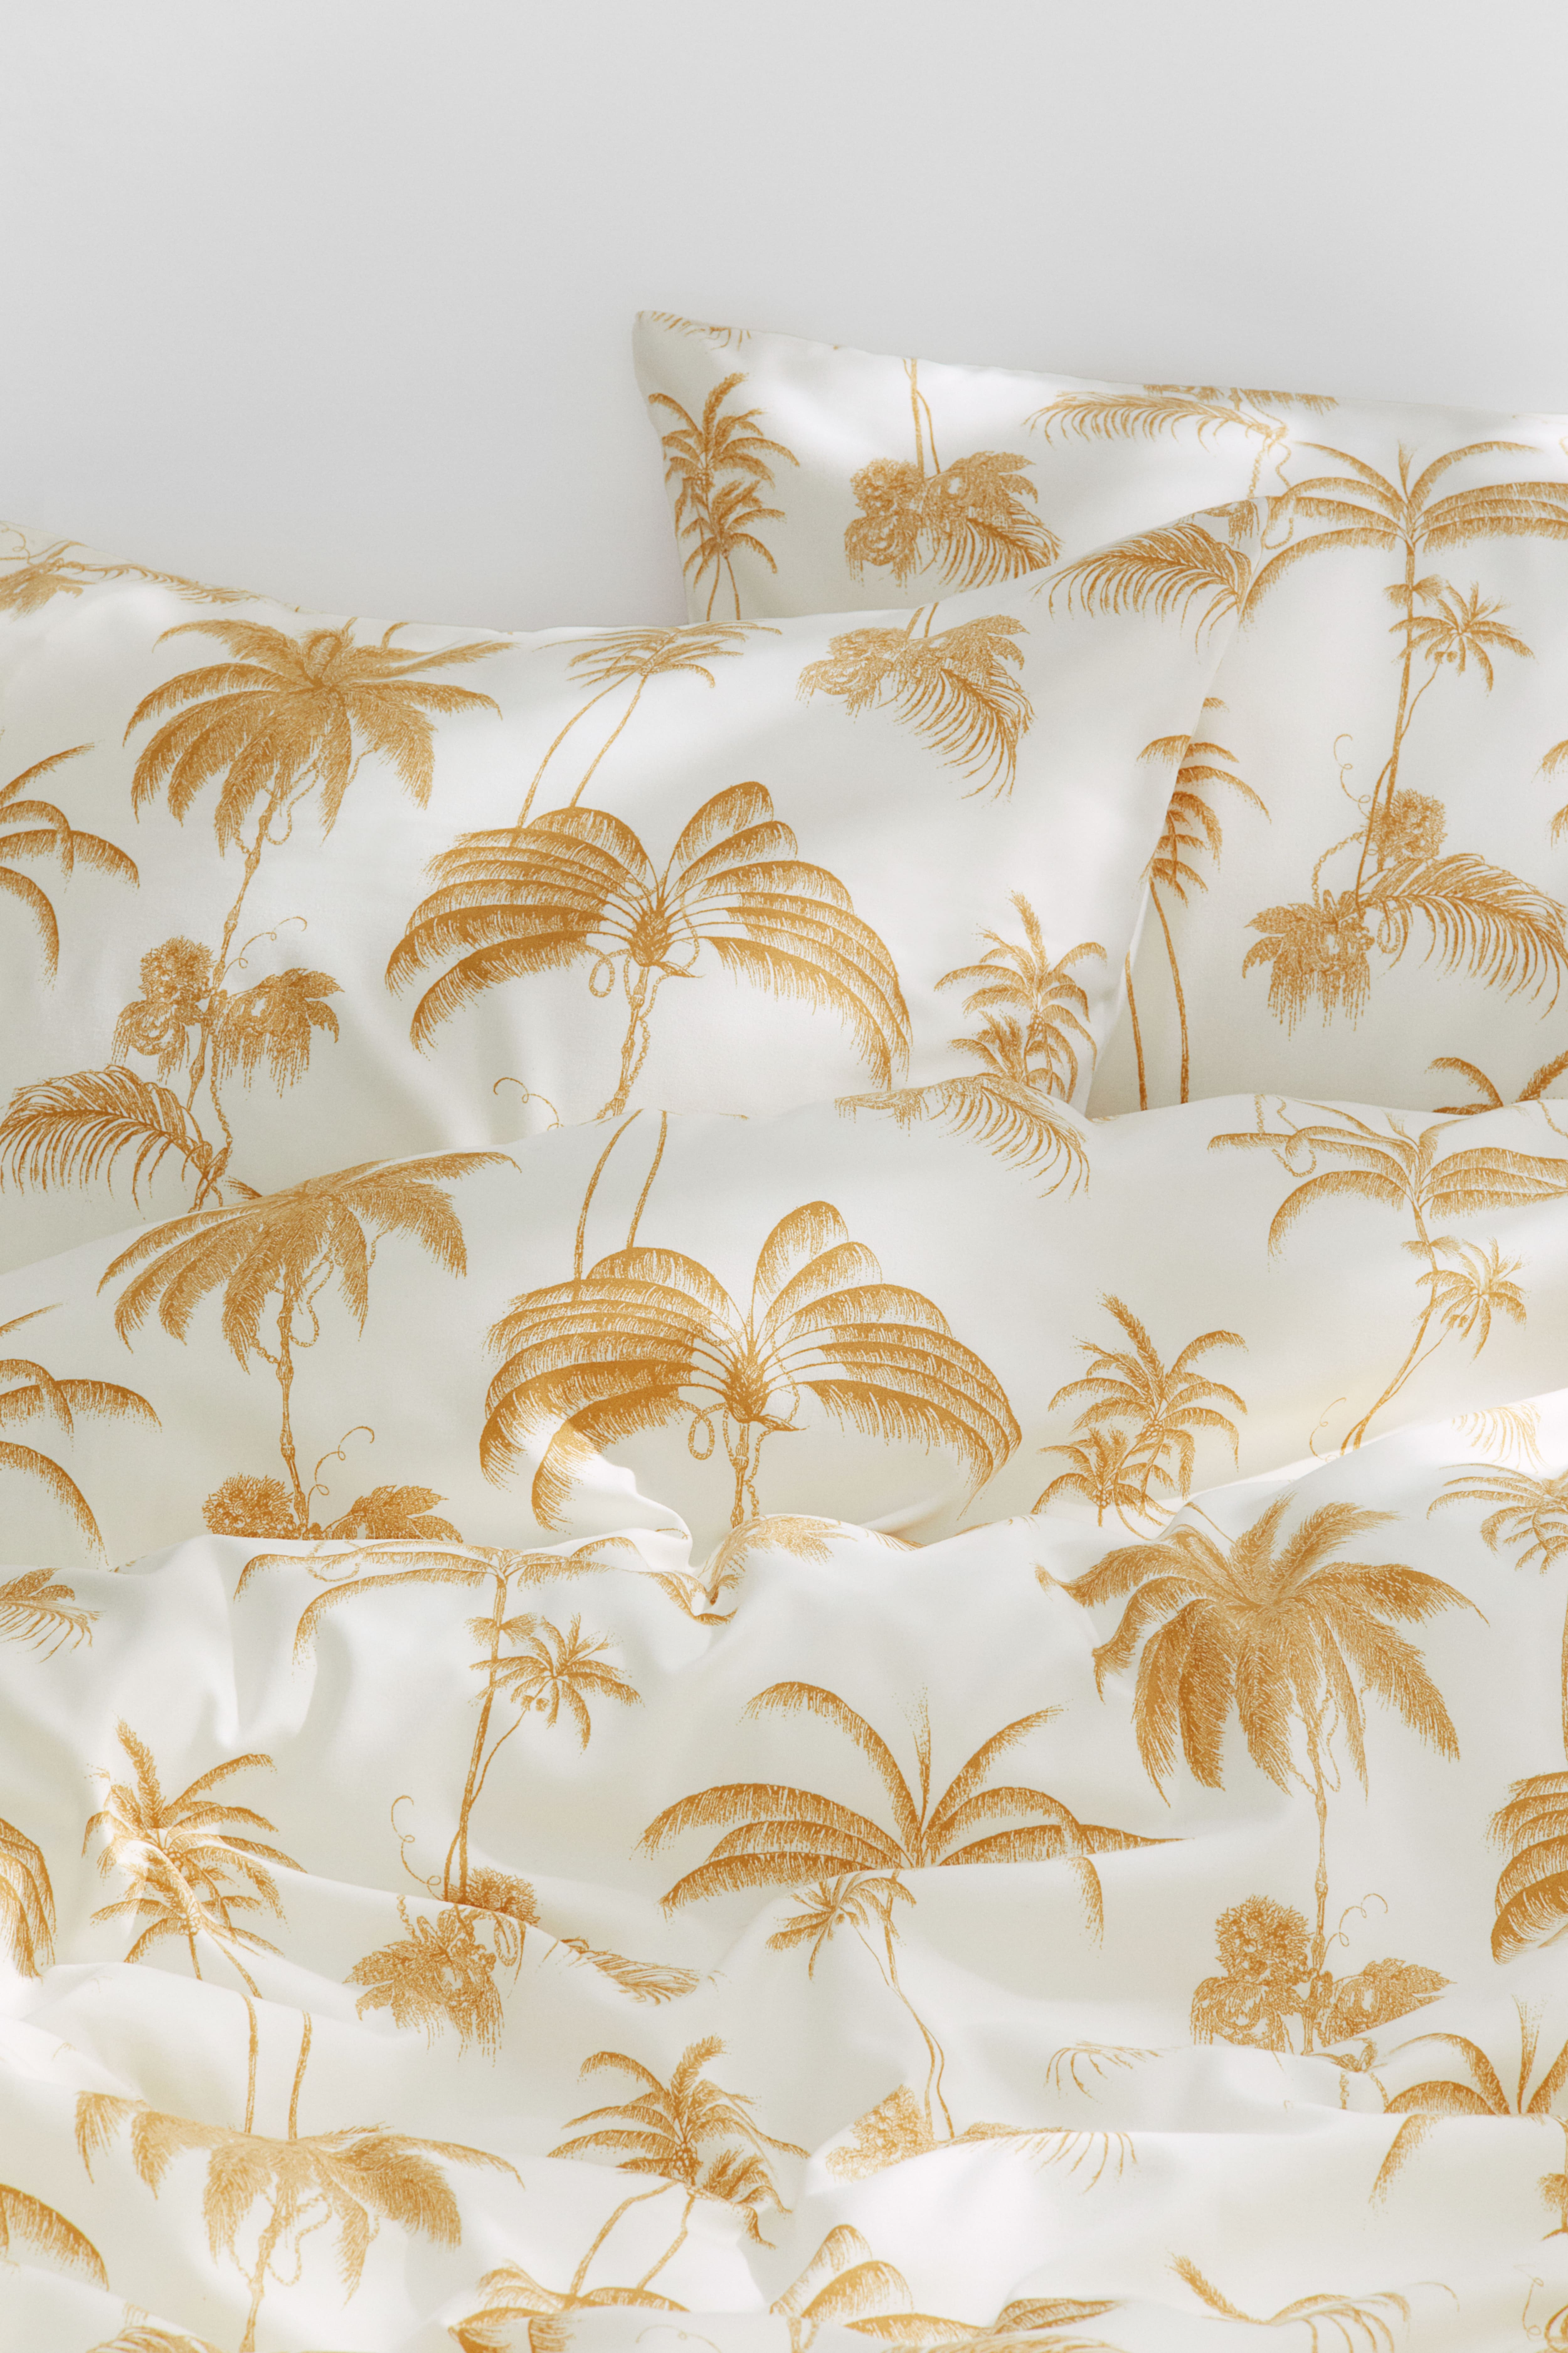 View All - Shop H&M Home Collection online | H&M US